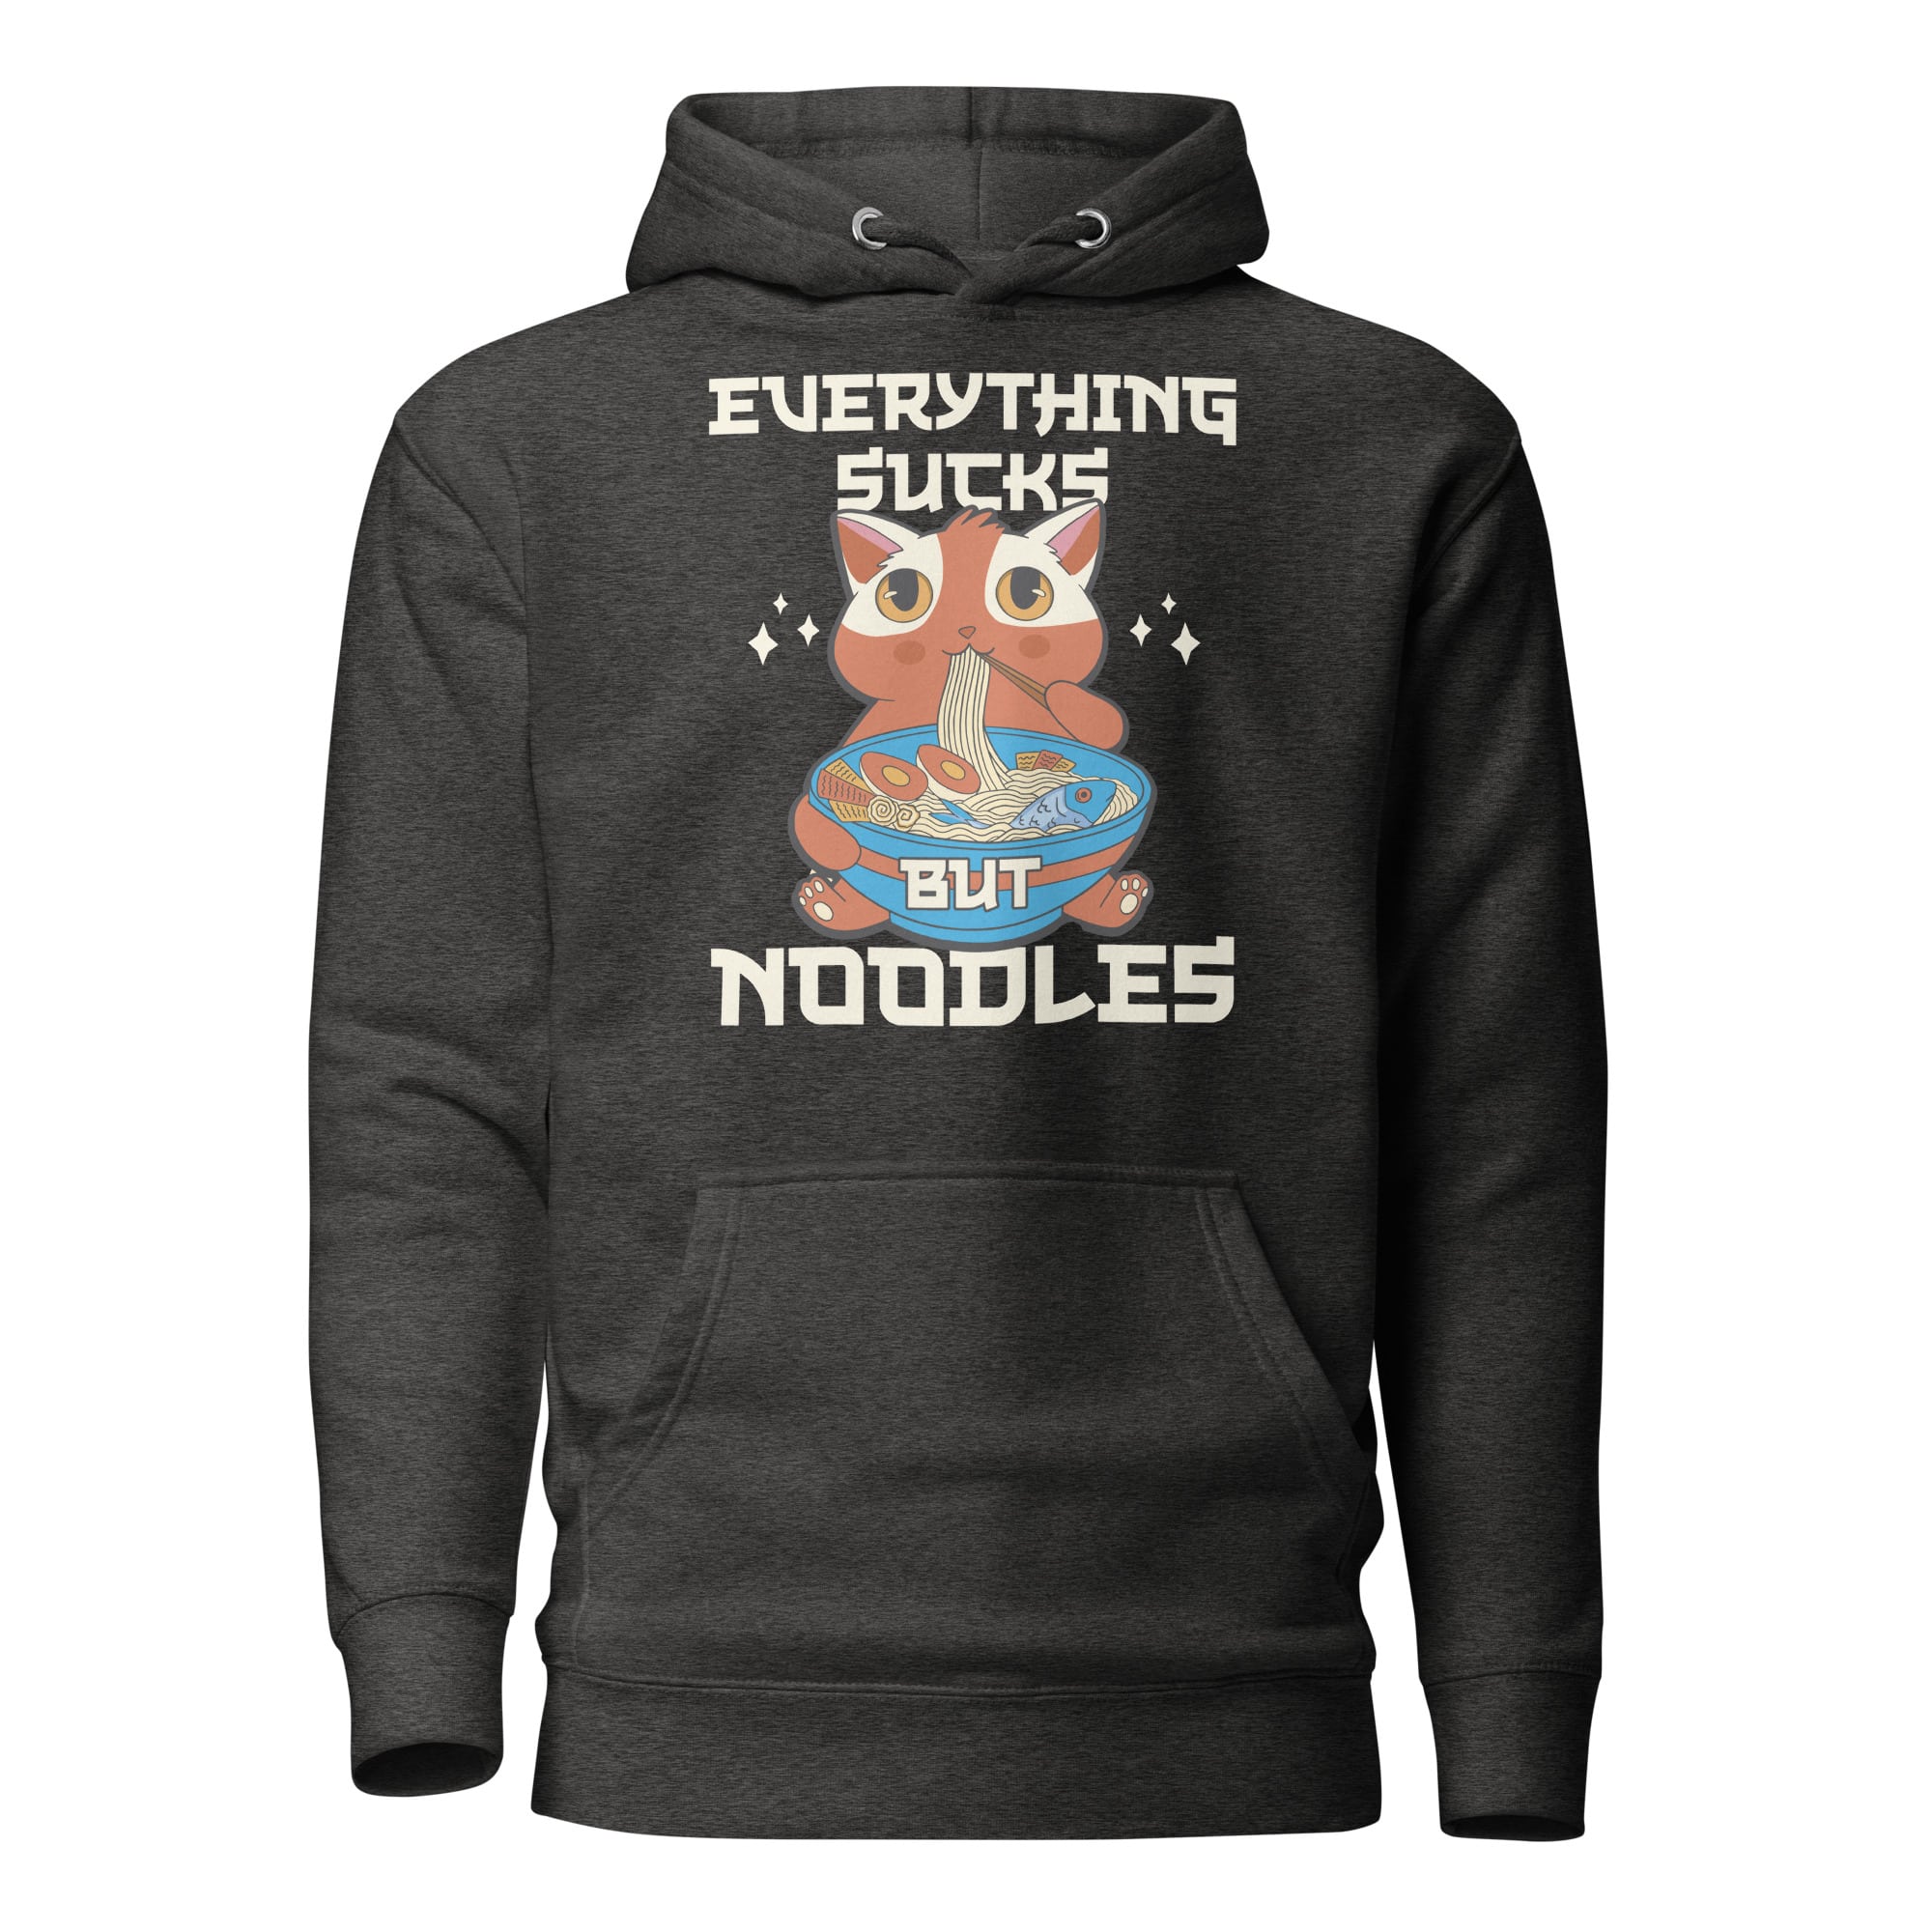 Everything Sucks But Noodles Anime Hoodie Video game store Gaming merchandise Gaming accessories shop Online gaming store Video game shop near me Gaming console store PC gaming store Gaming gear shop Retro gaming shop Board game shop Anime merchandise Anime store online Japanese anime shop Anime figurines Manga shop Anime DVDs Anime accessories Anime apparel Anime collectibles Anime gifts